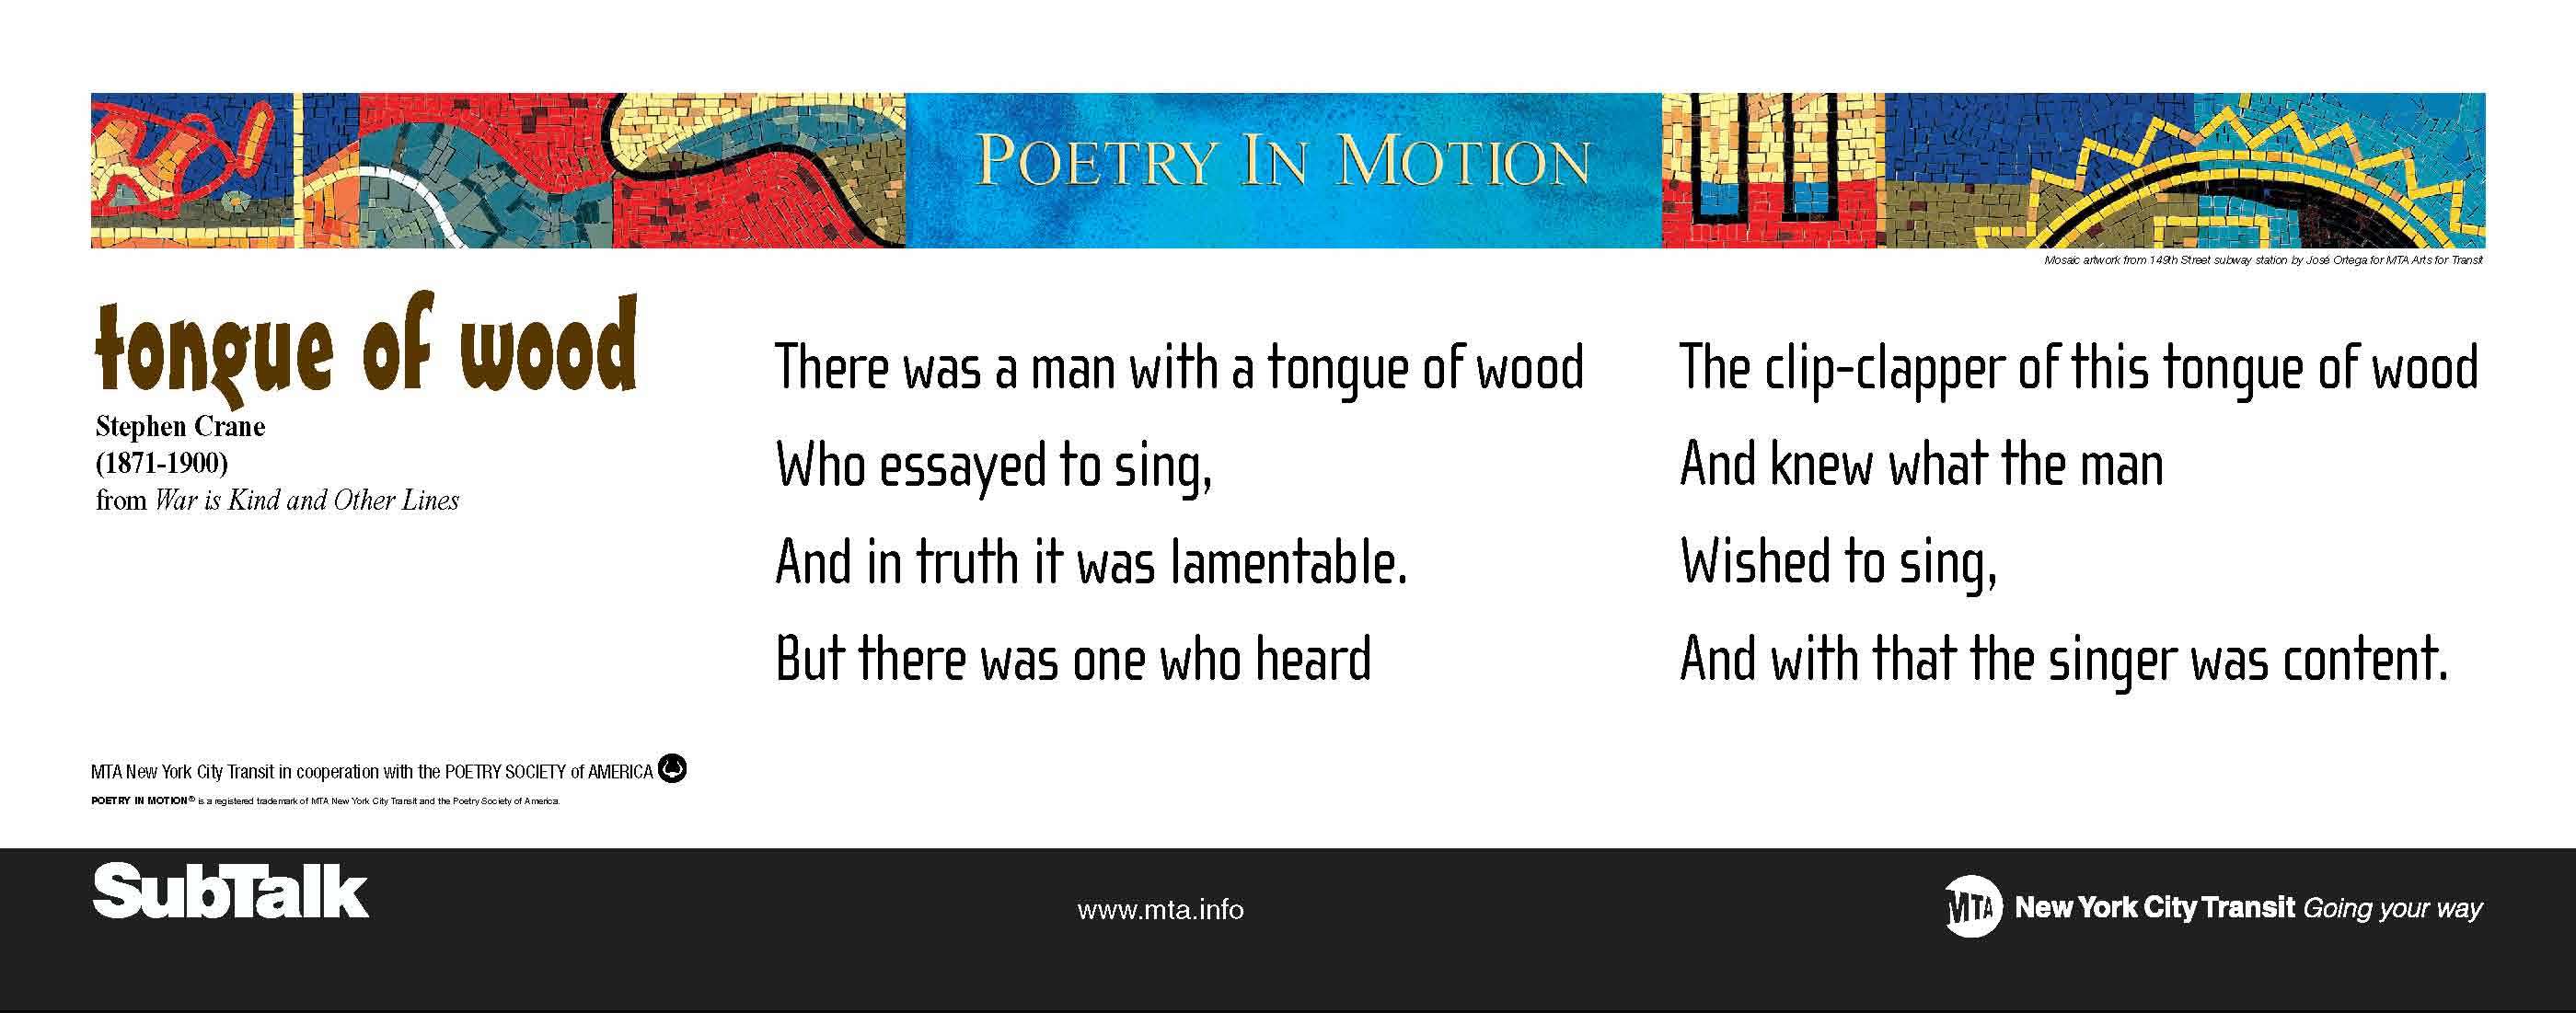 A horizontal poster with a colorful mosaic at the top features a poem titled Tongue of Wood, by Stephen Crane